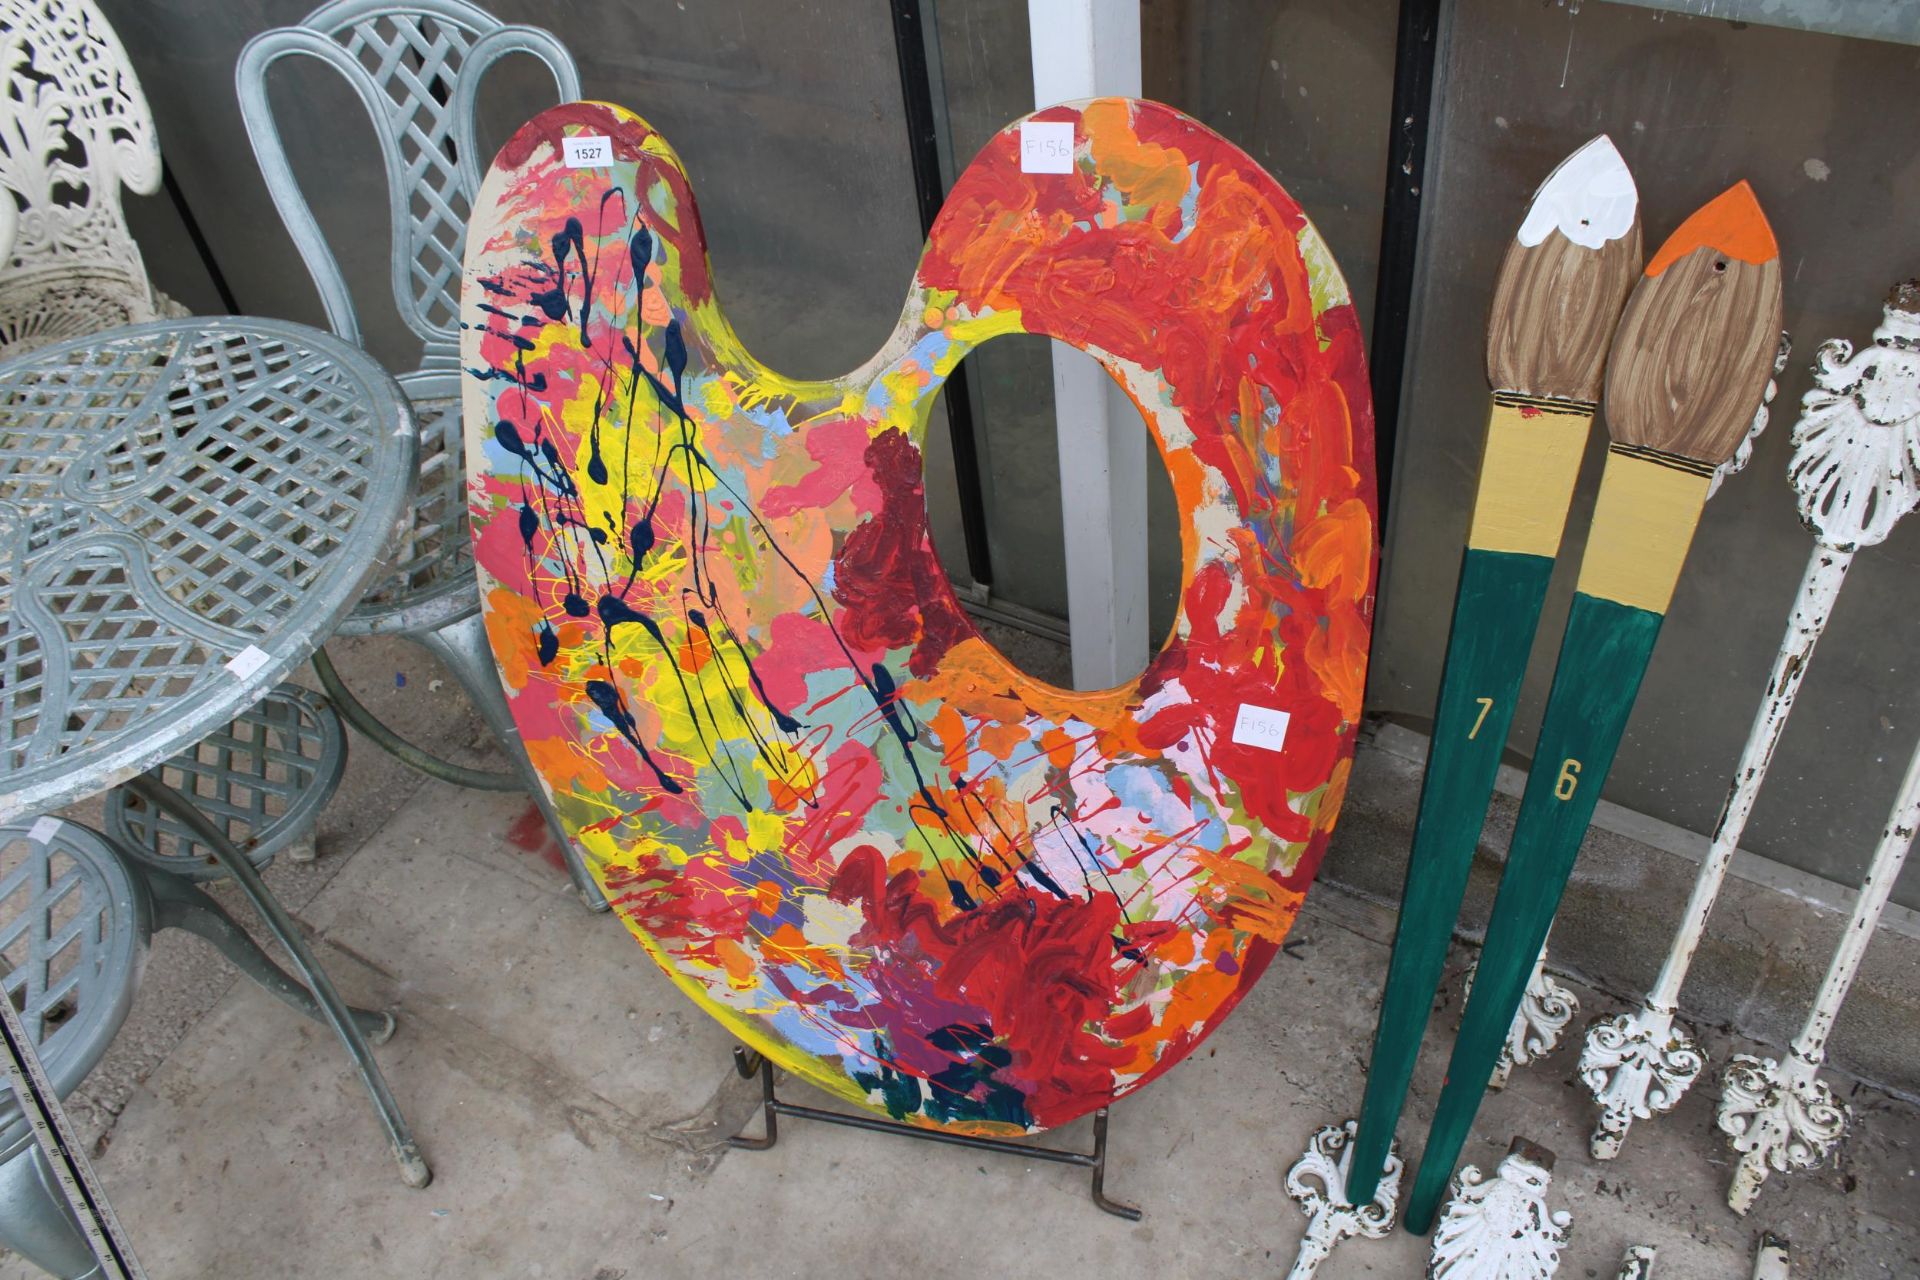 A LARGE WOODEN ARTIST PALLET AND TWO PAINT BRUSHES - Image 2 of 3